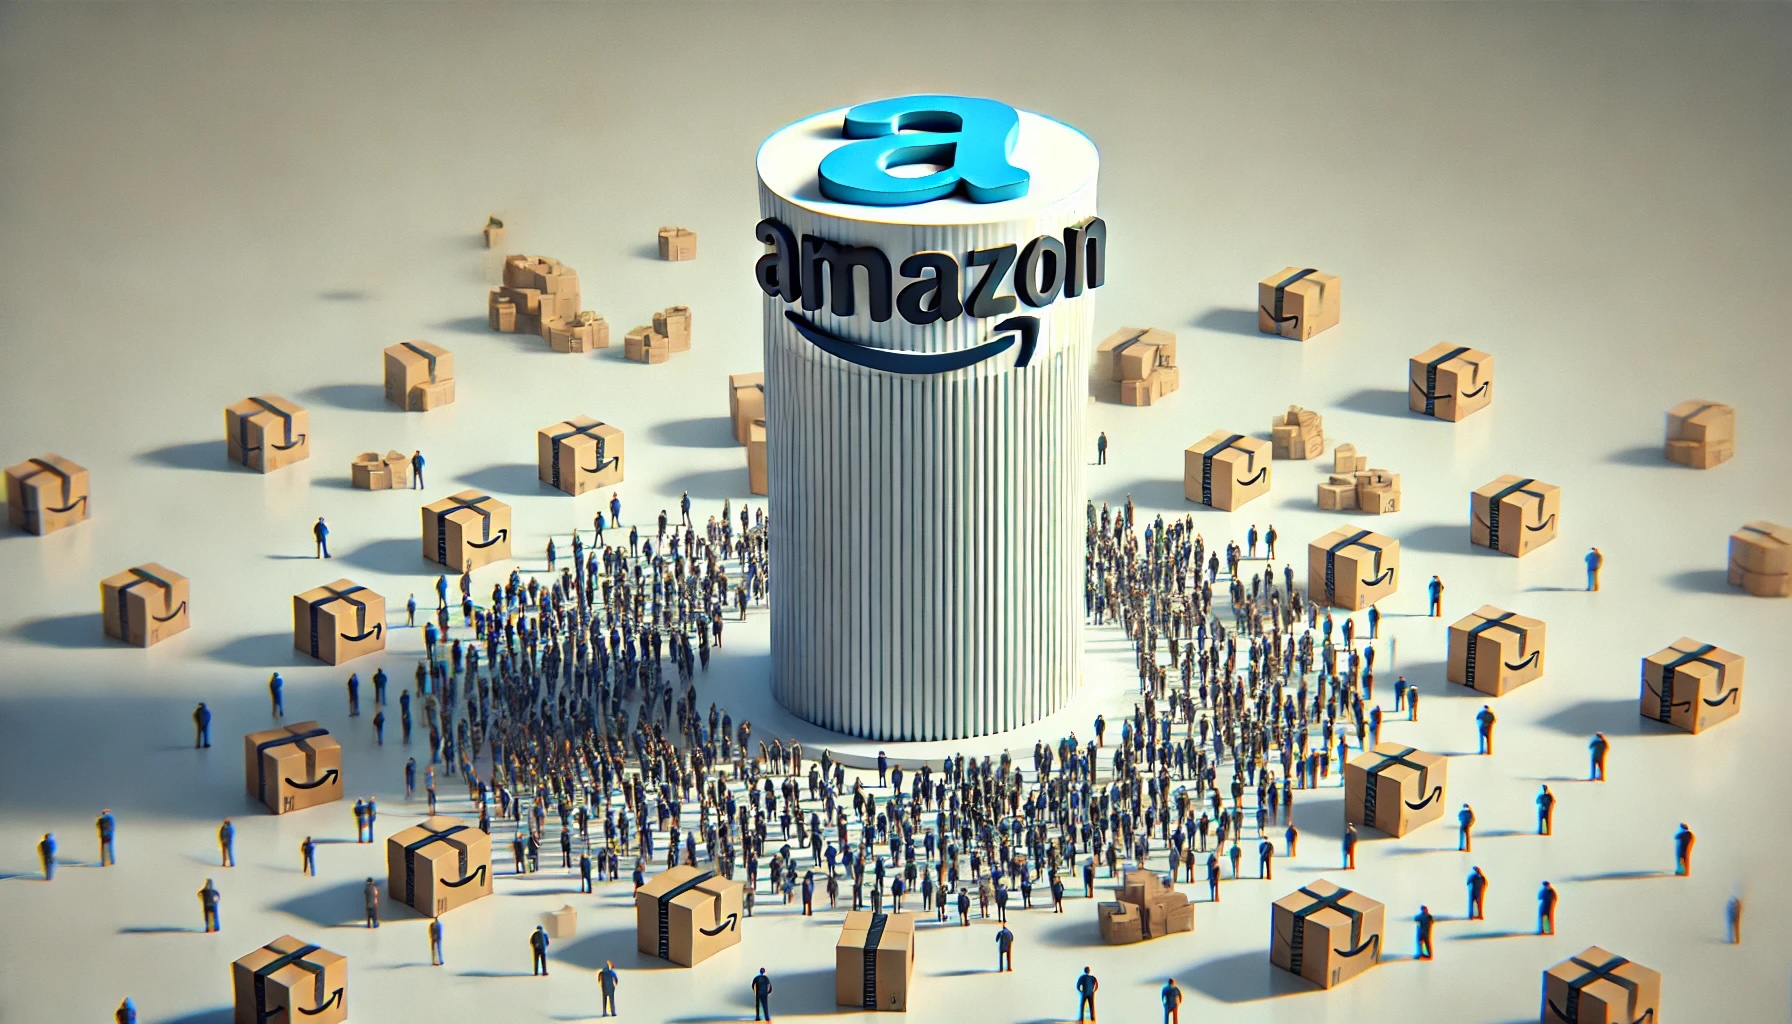 hundreds of amazon sellers gathered around the base of an enormous amazon branded tower